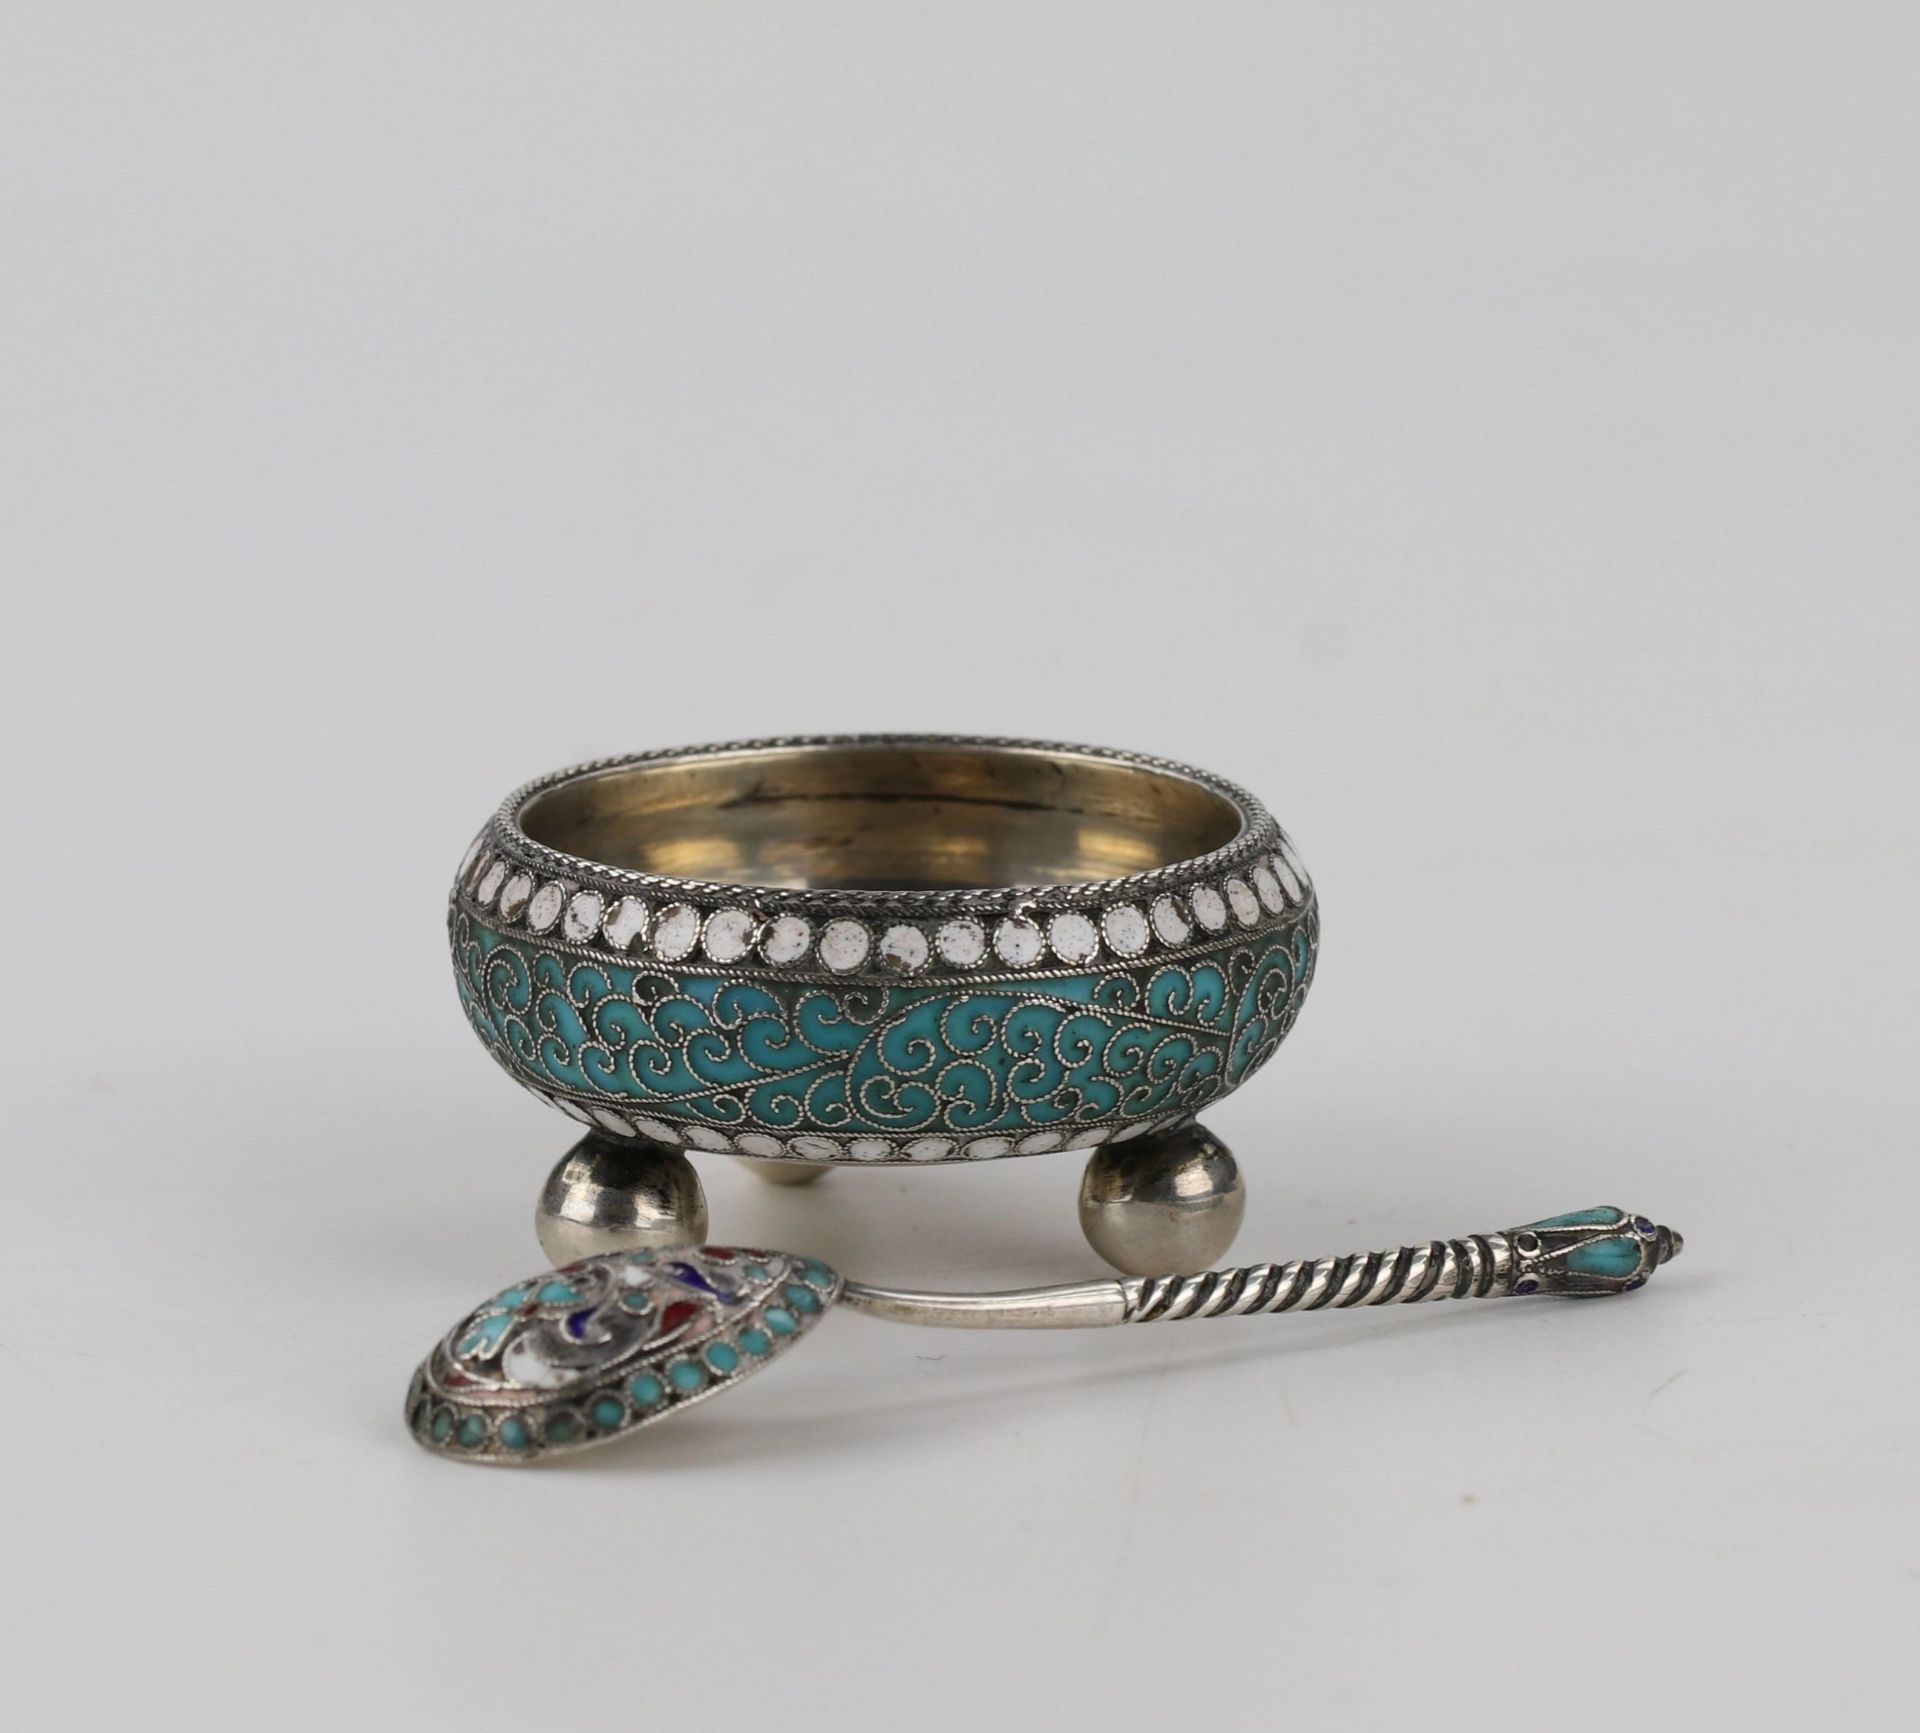 An elegant silver salt cellar with a spoon. - Image 2 of 5